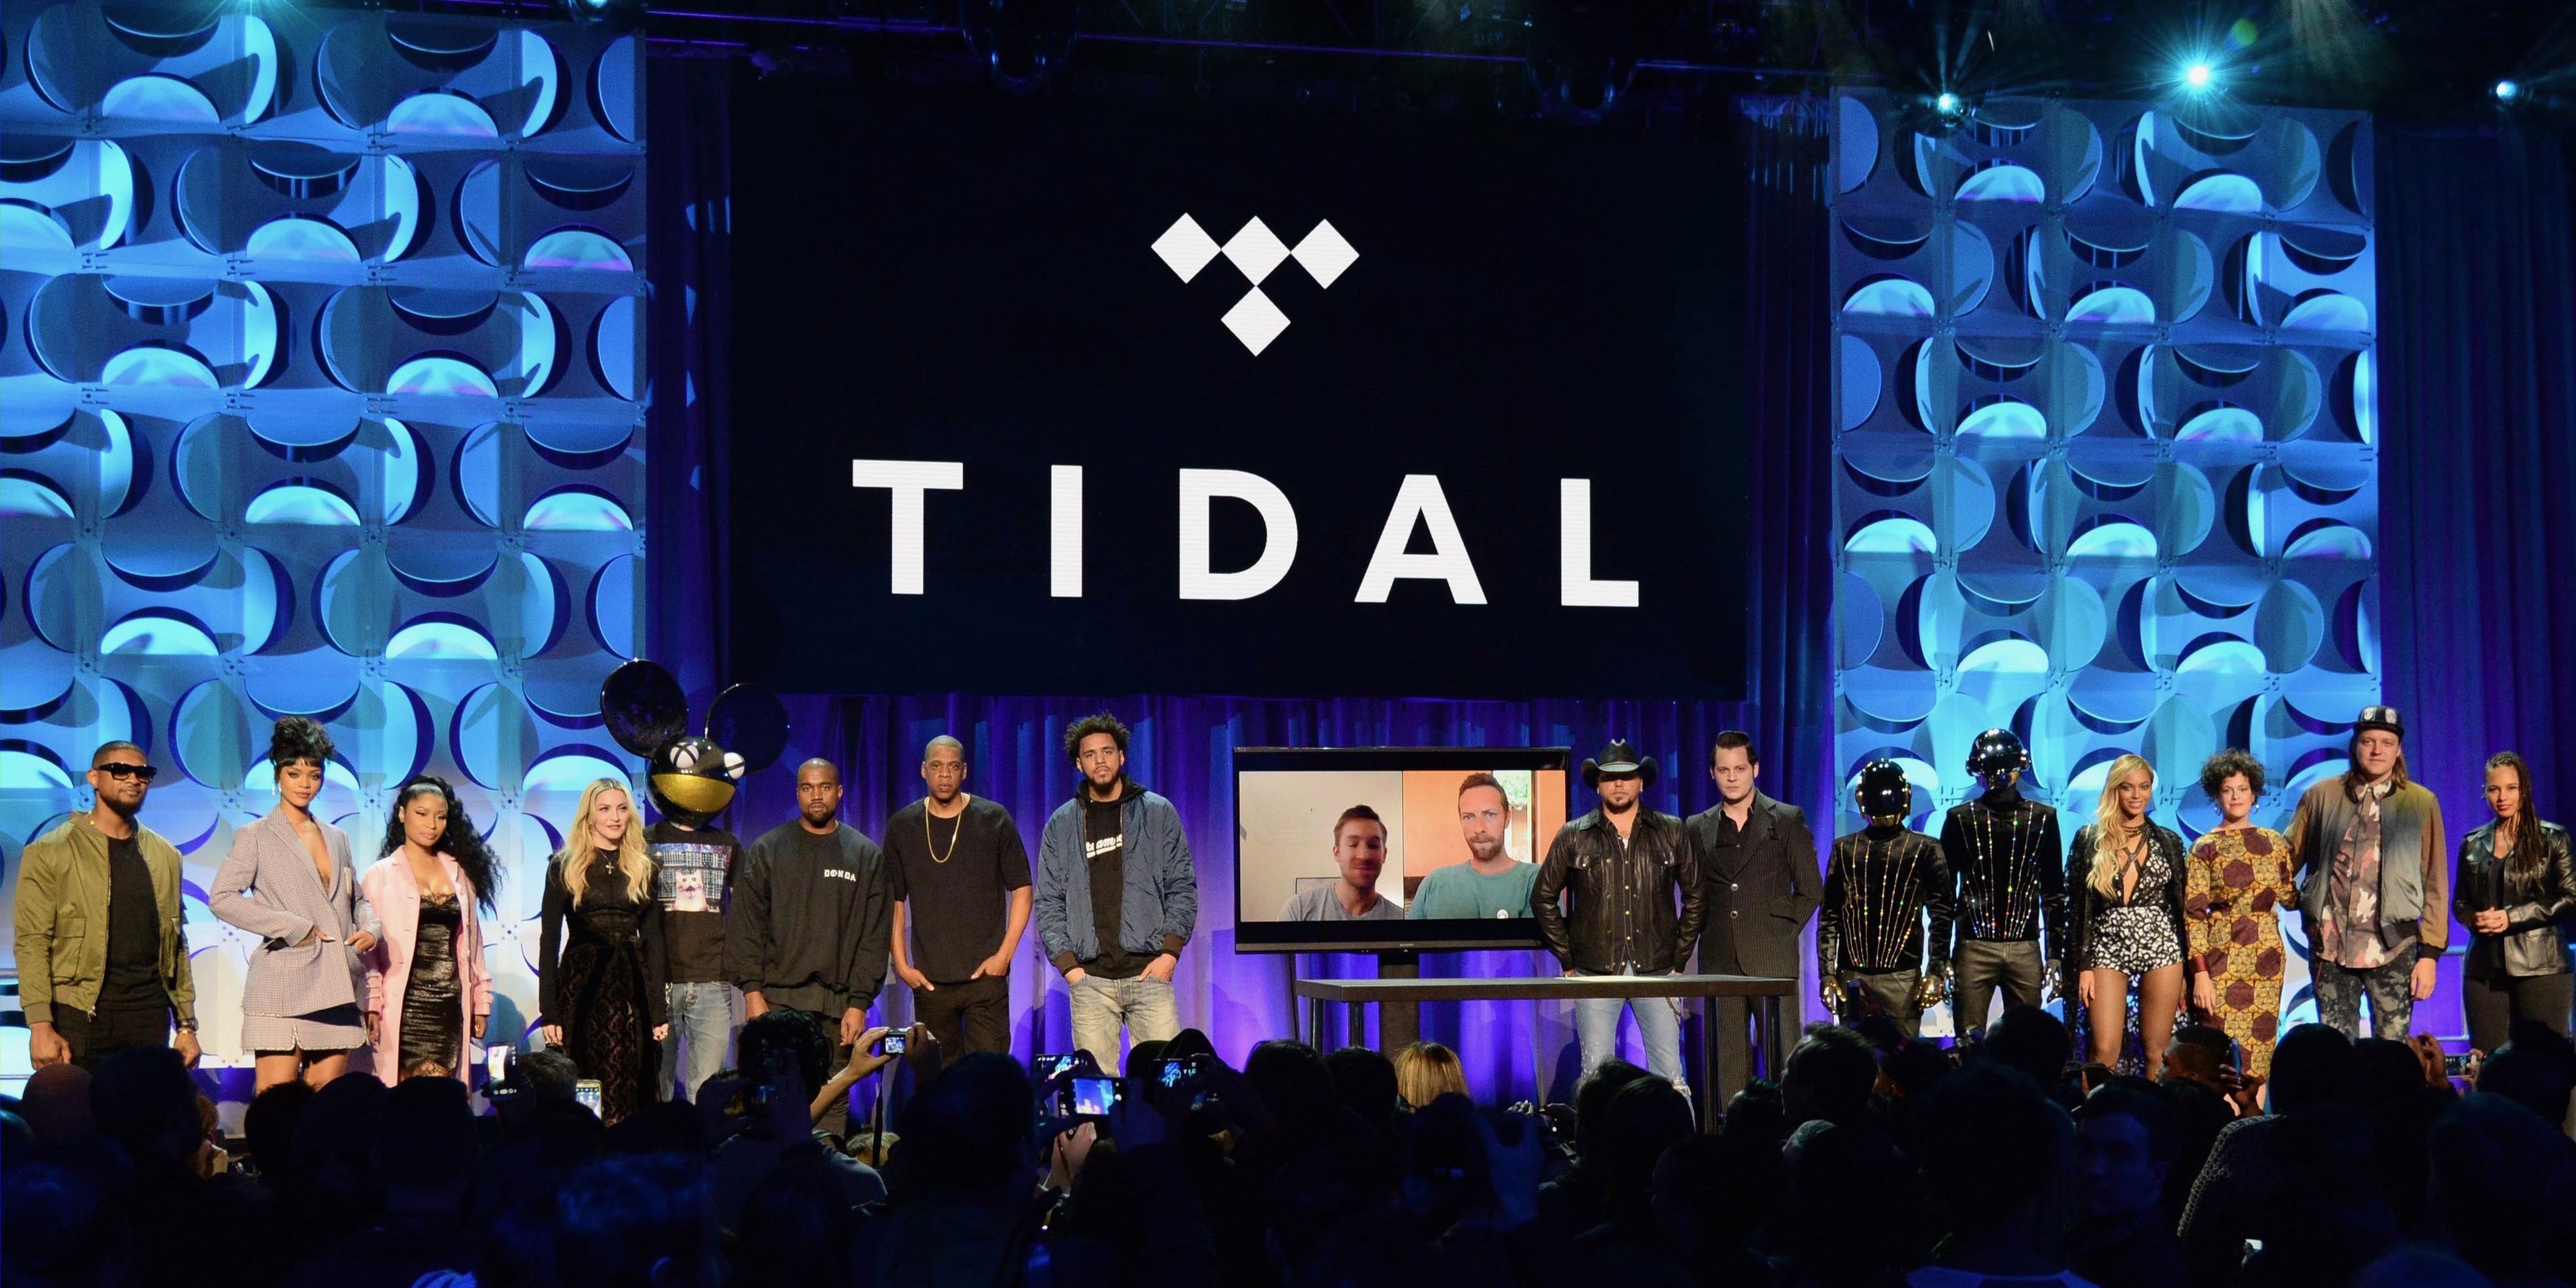 link tidal to tv